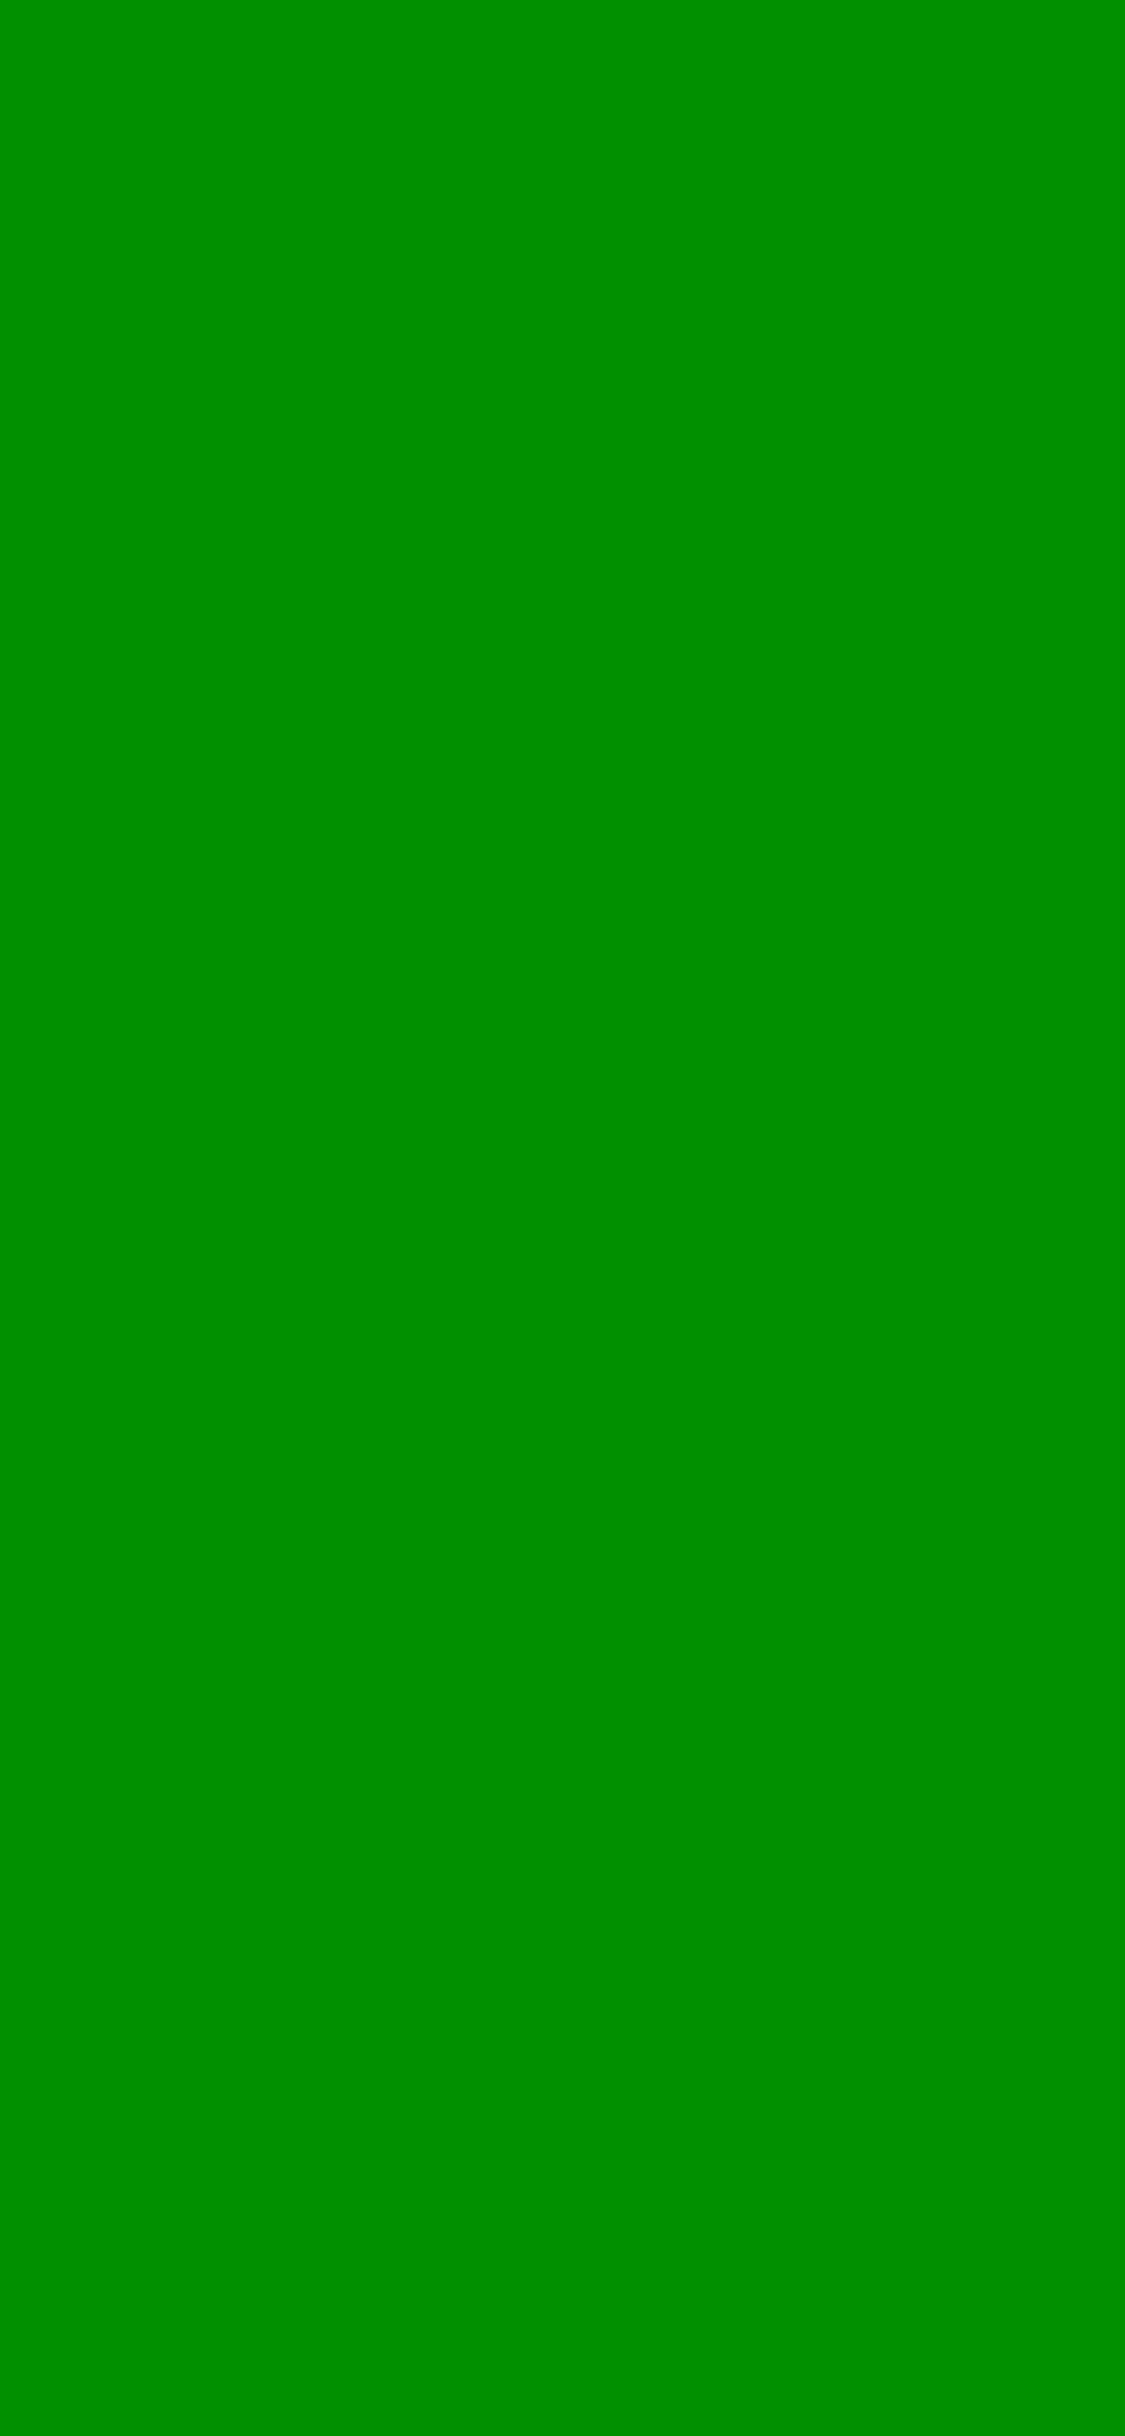 1125x2436 Islamic Green Solid Color Background